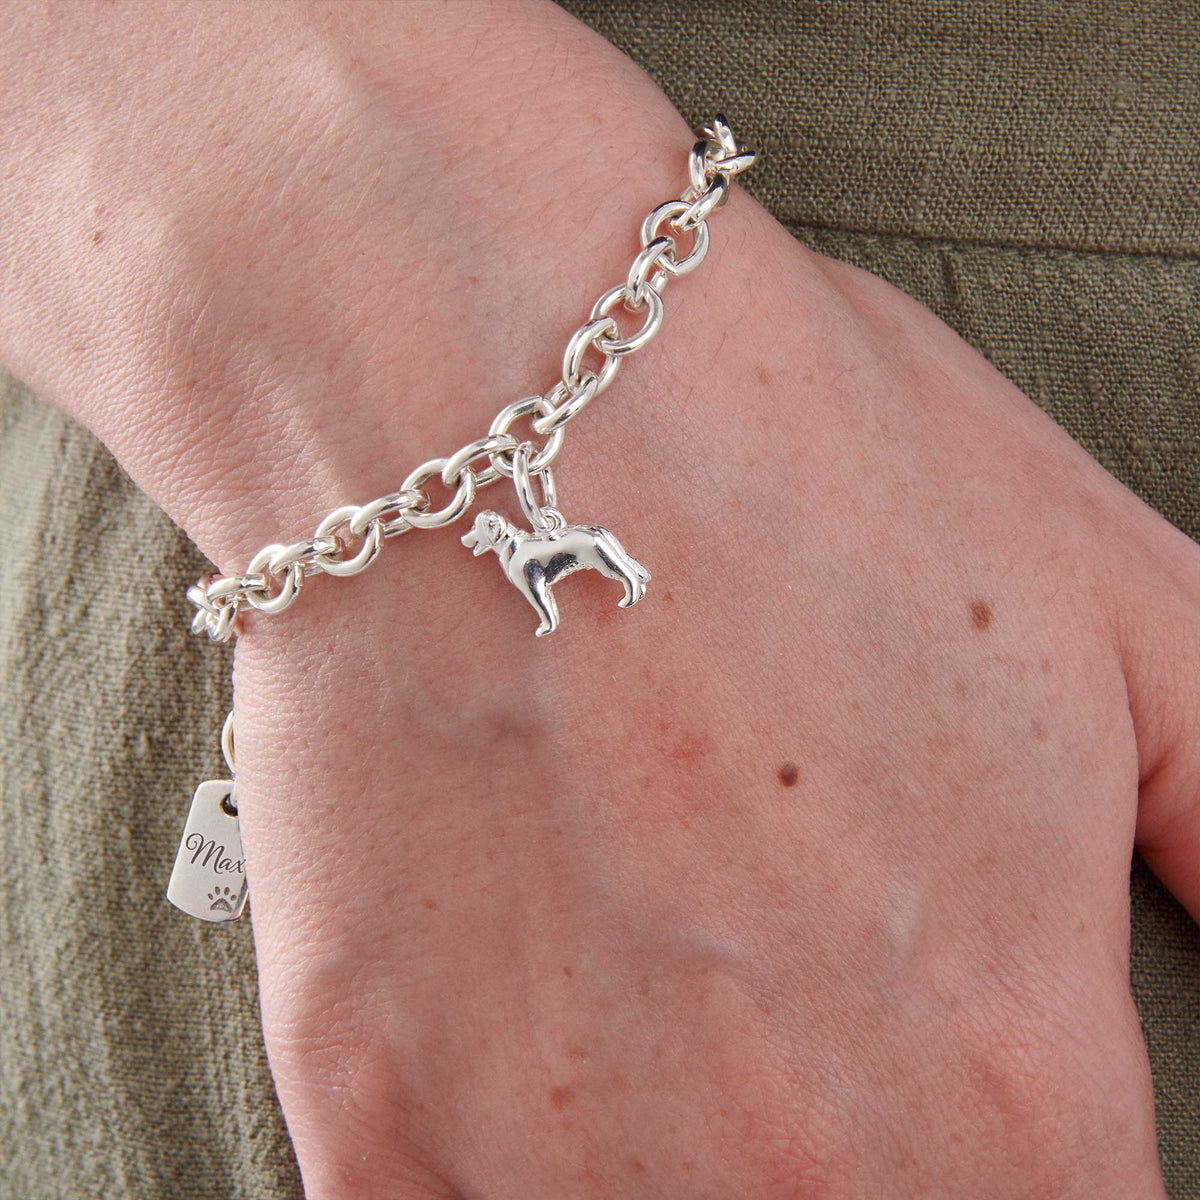 golden retriever silver charm bracelet with personalised engraved dog tag scarlett jewellery